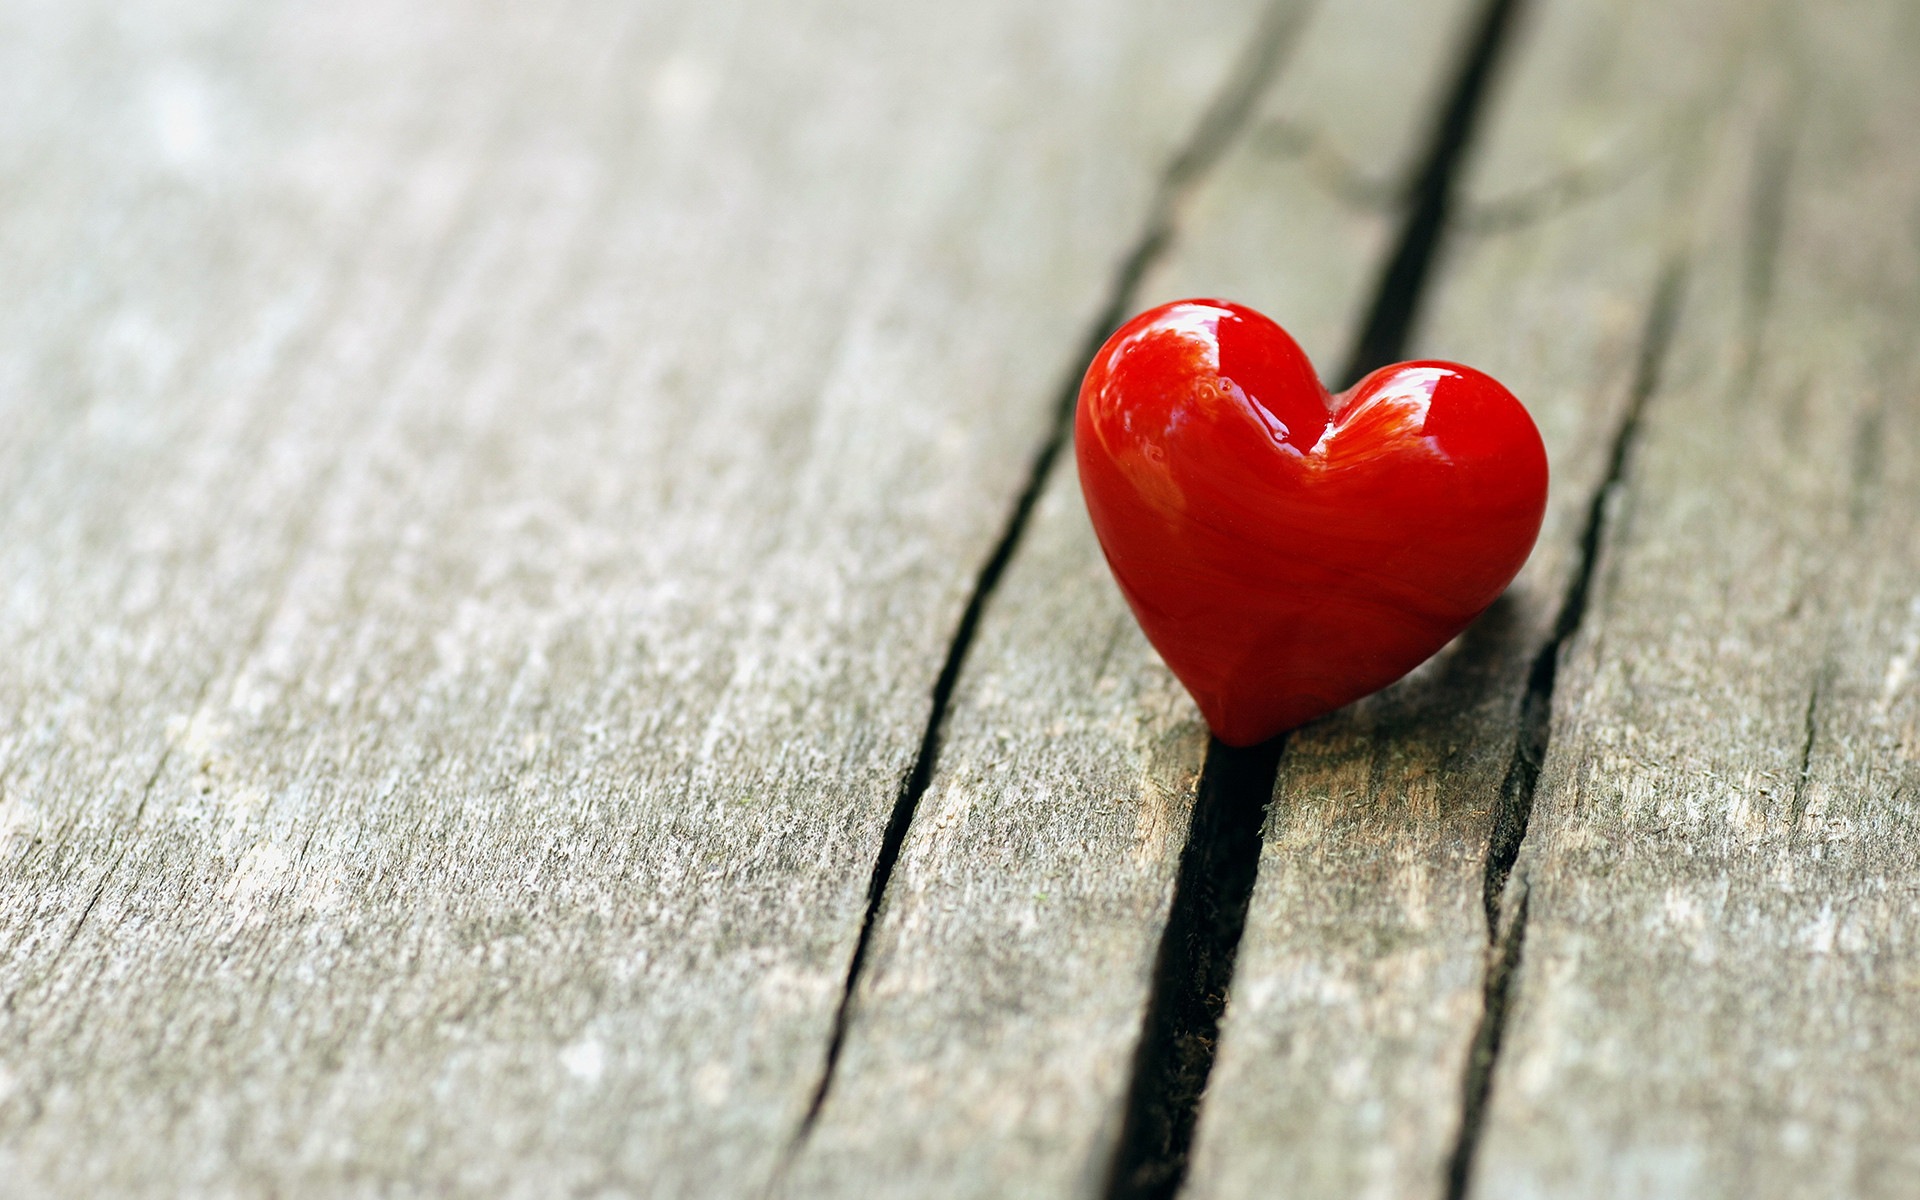 The theme of love, creative heart-shaped HD wallpapers #9 - 1920x1200